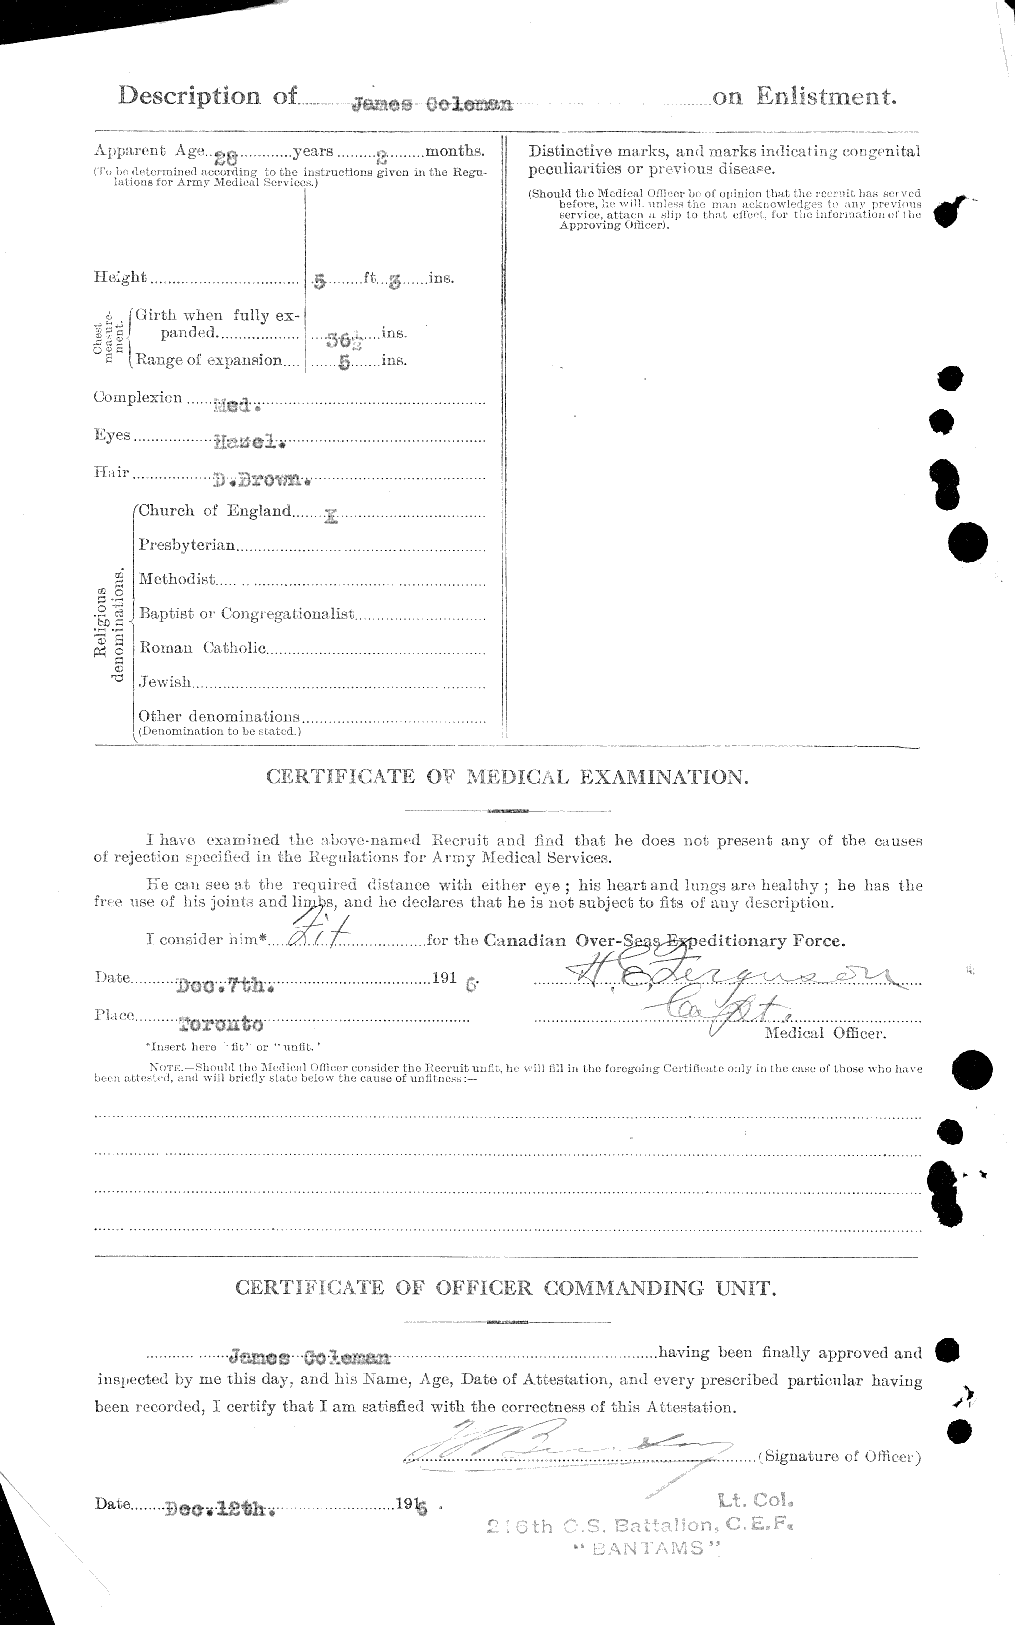 Personnel Records of the First World War - CEF 028186b